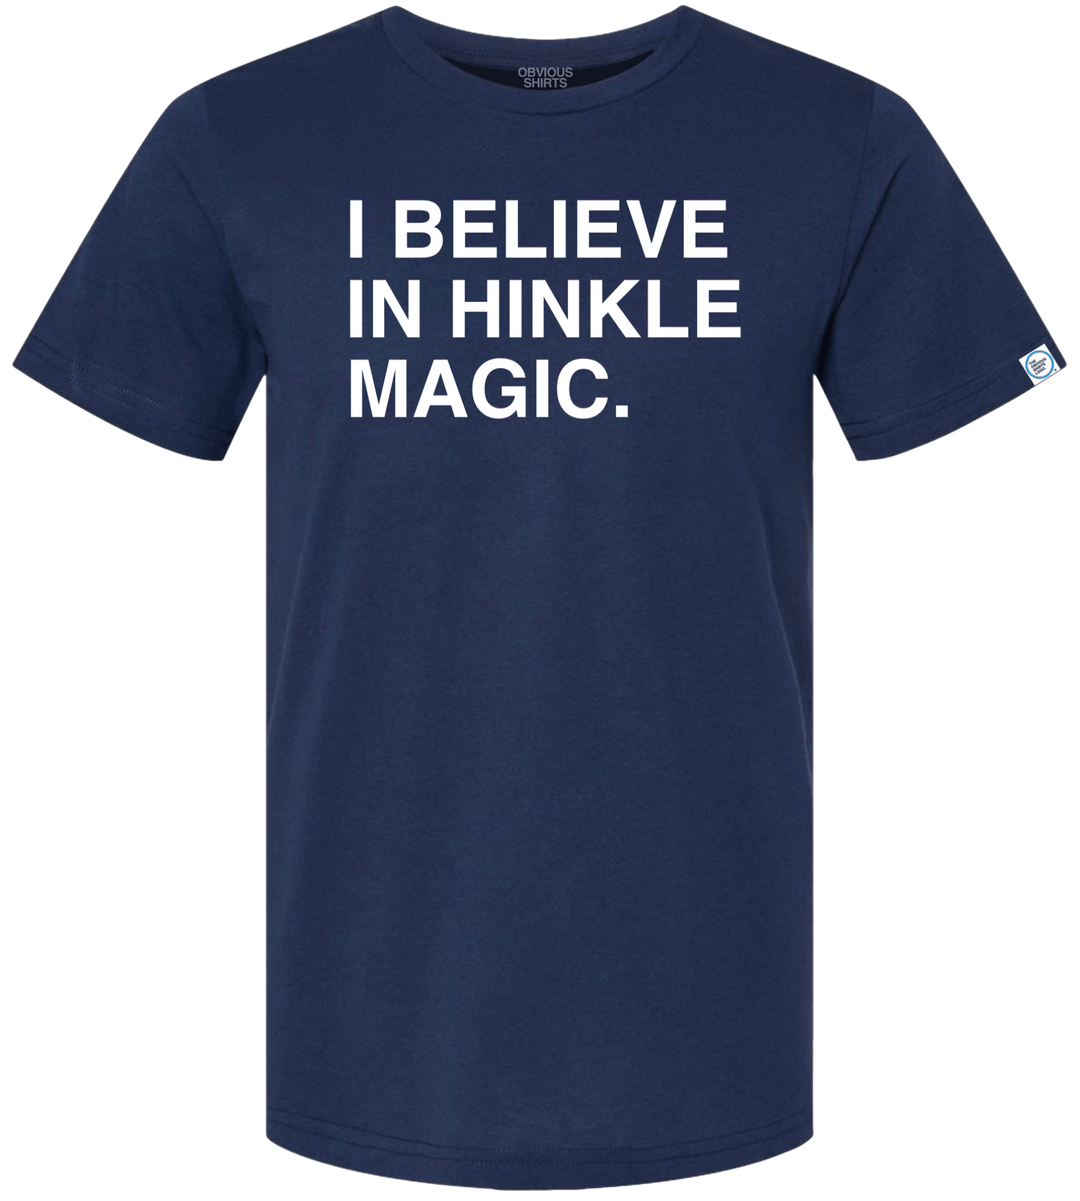 I BELIEVE IN HINKLE MAGIC. - OBVIOUS SHIRTS